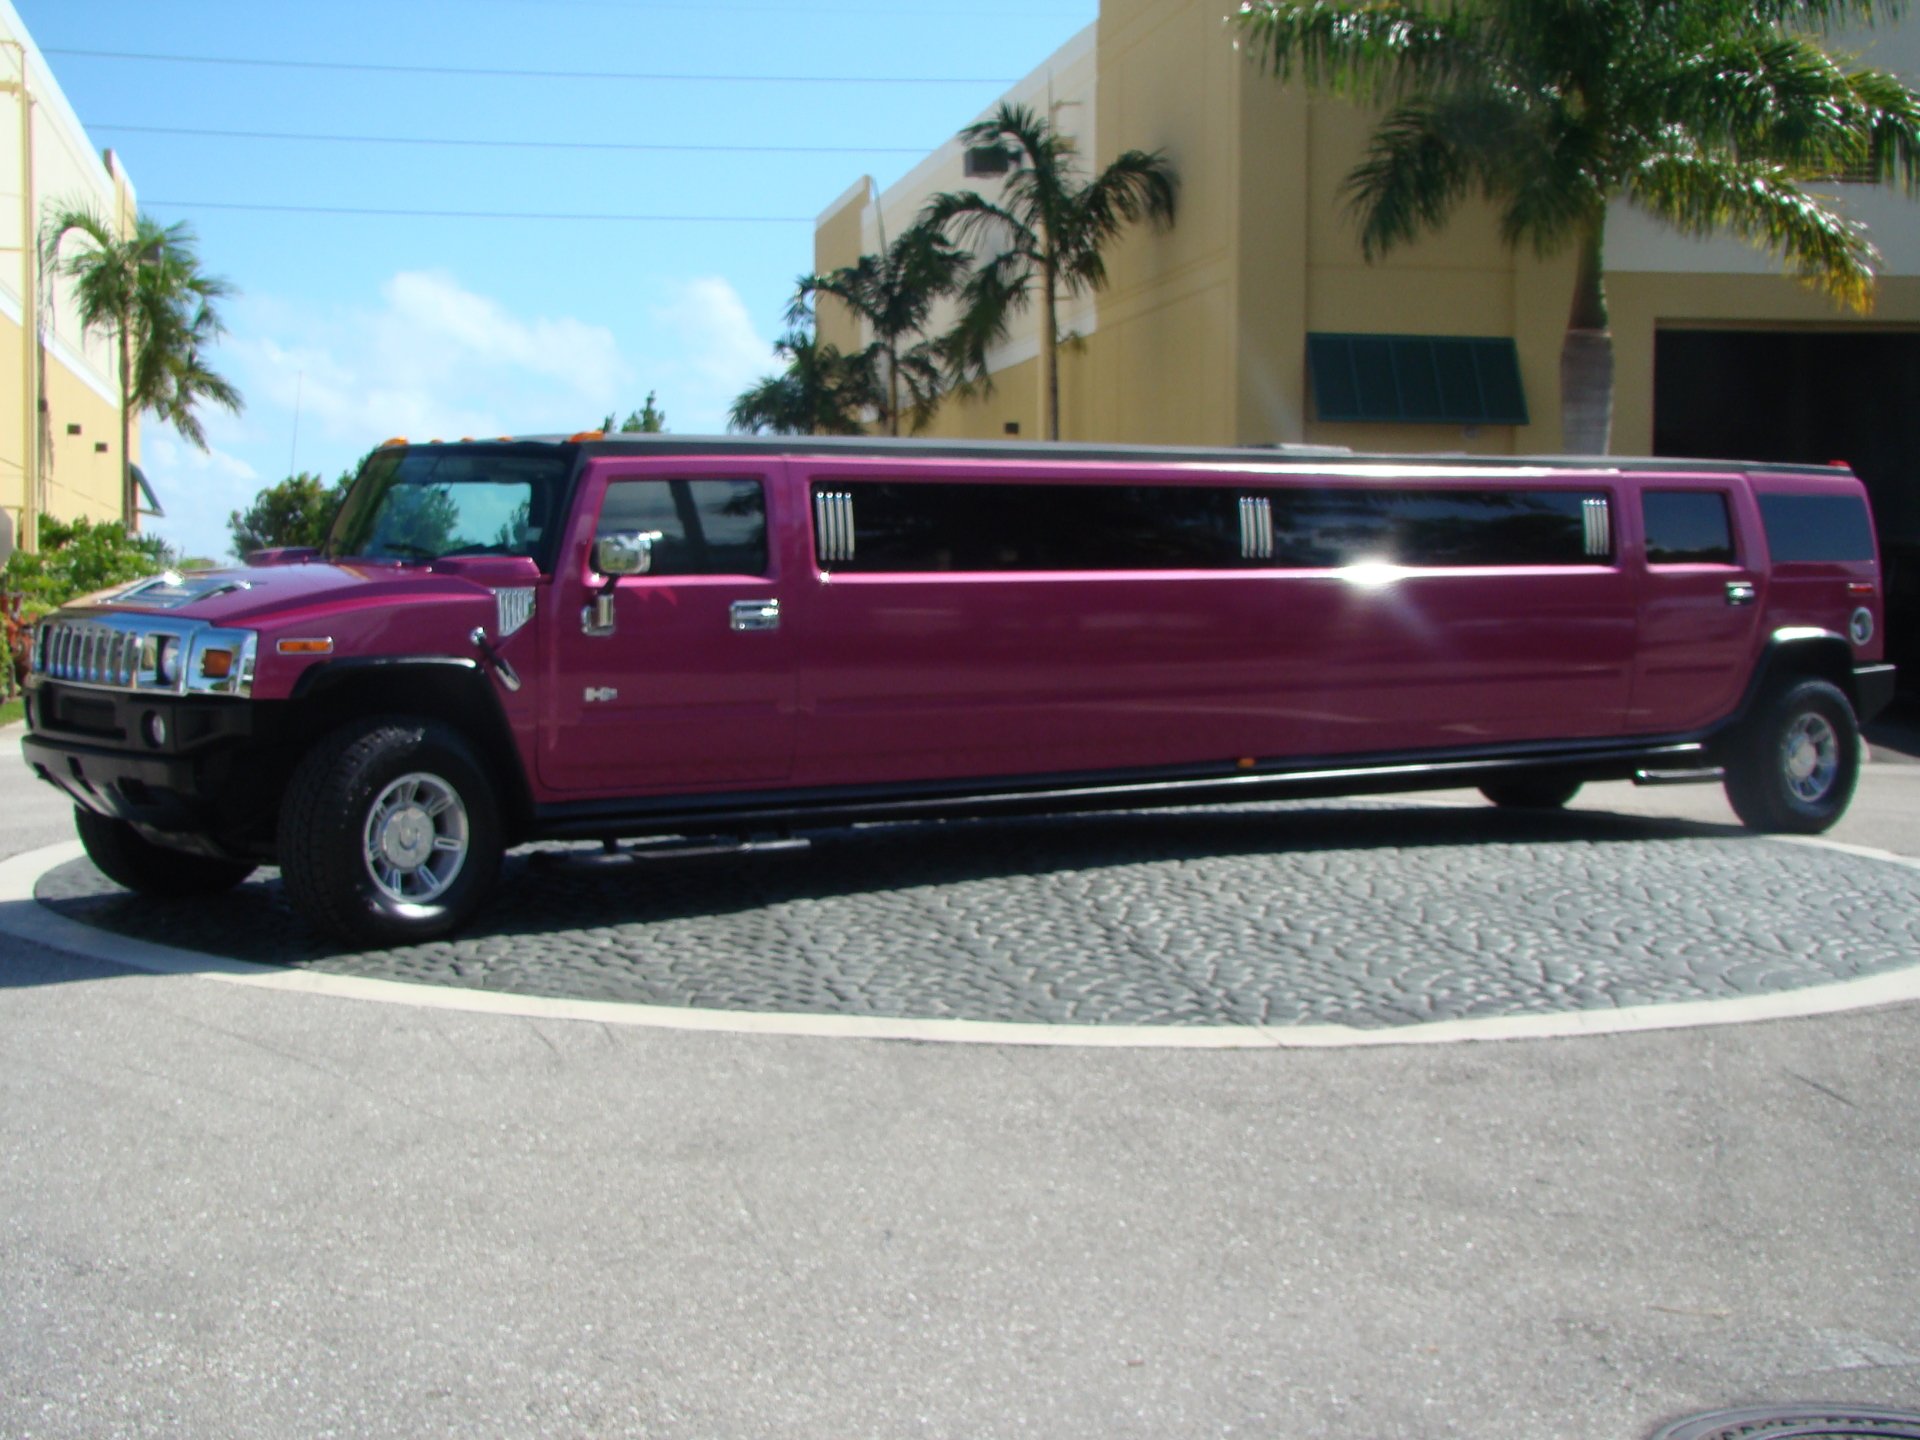 Hummer Limousine Wallpapers